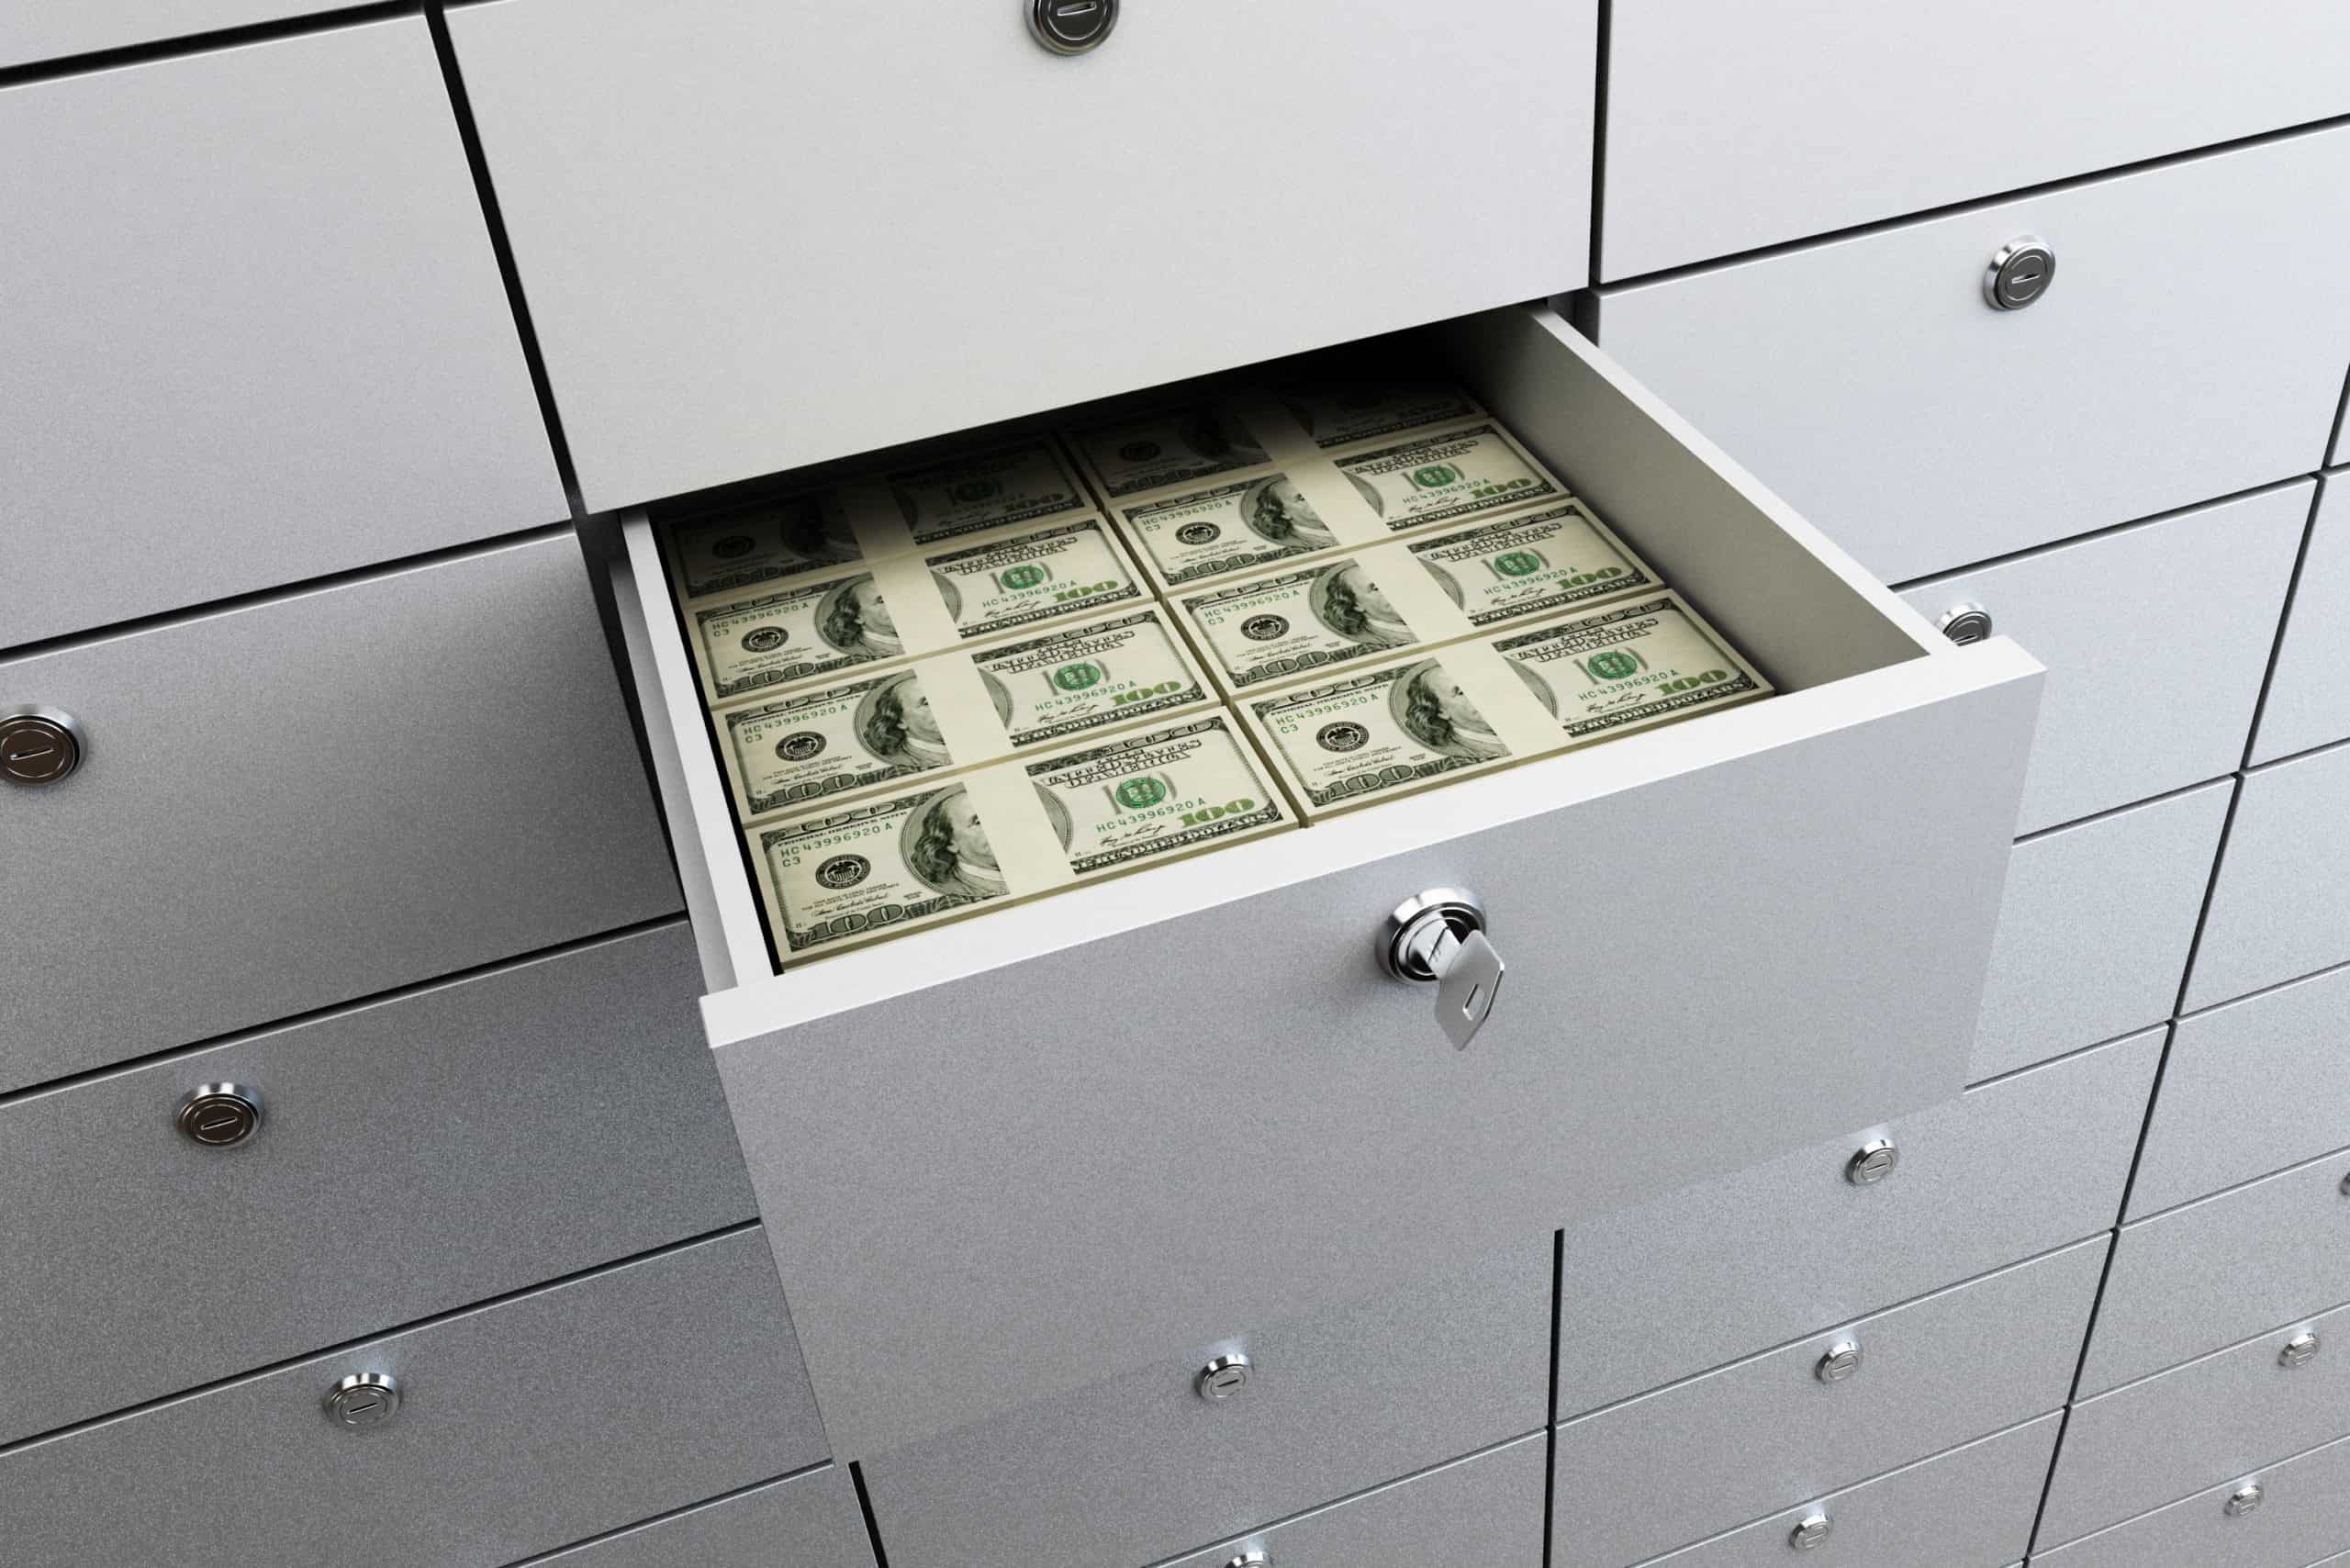 Brand new hundred dollar bills strapped and stored in a bank vault safe deposit box for an emergency fund